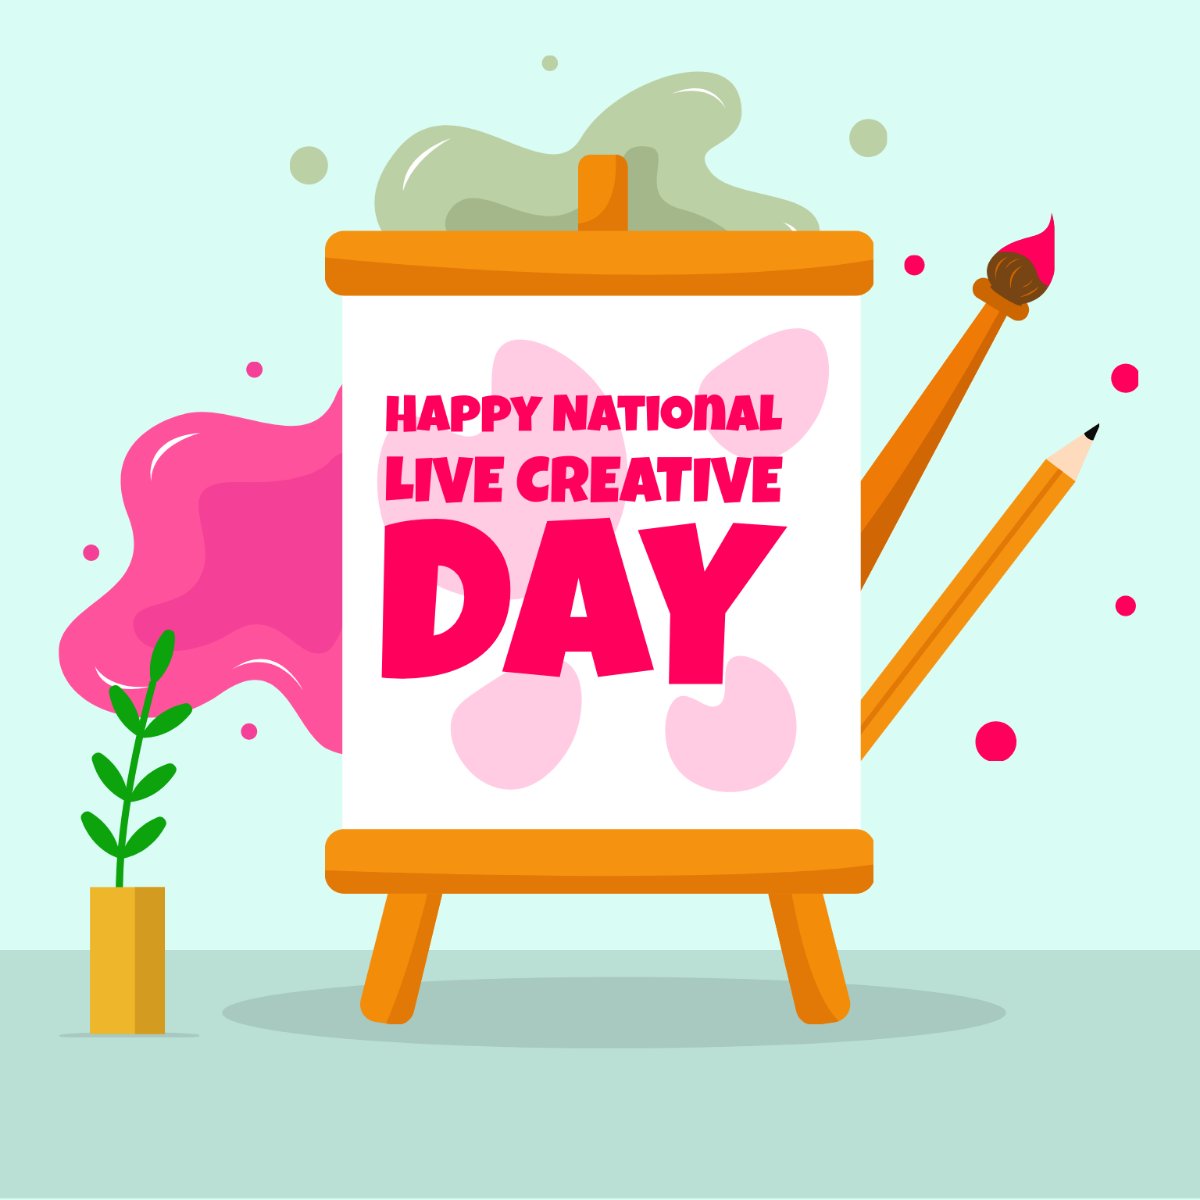 Happy National Live Creative Day Illustration